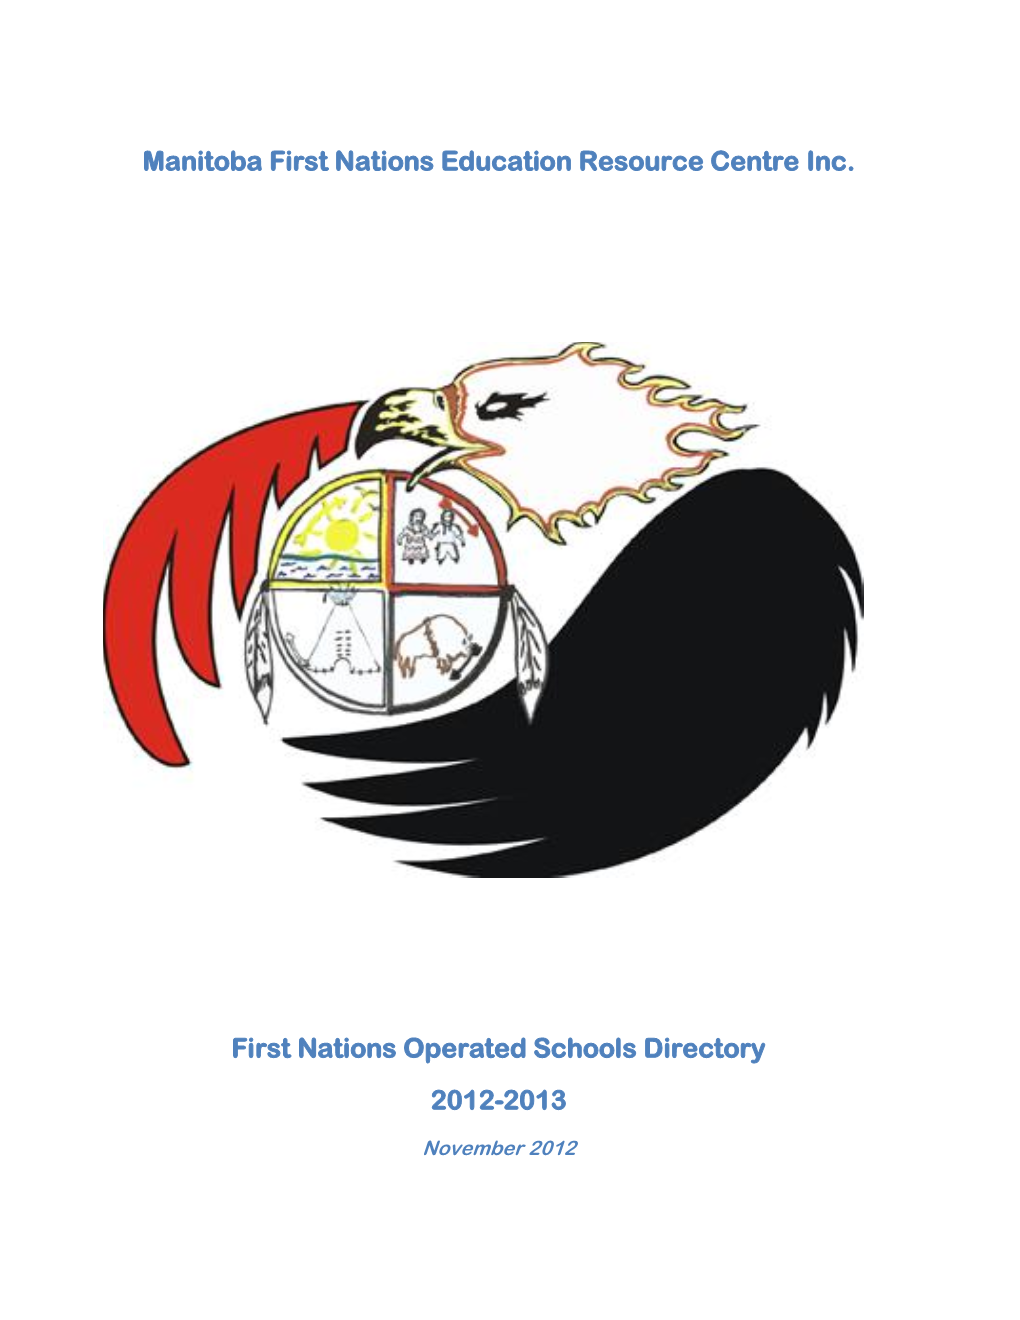 First Nations Operated Schools